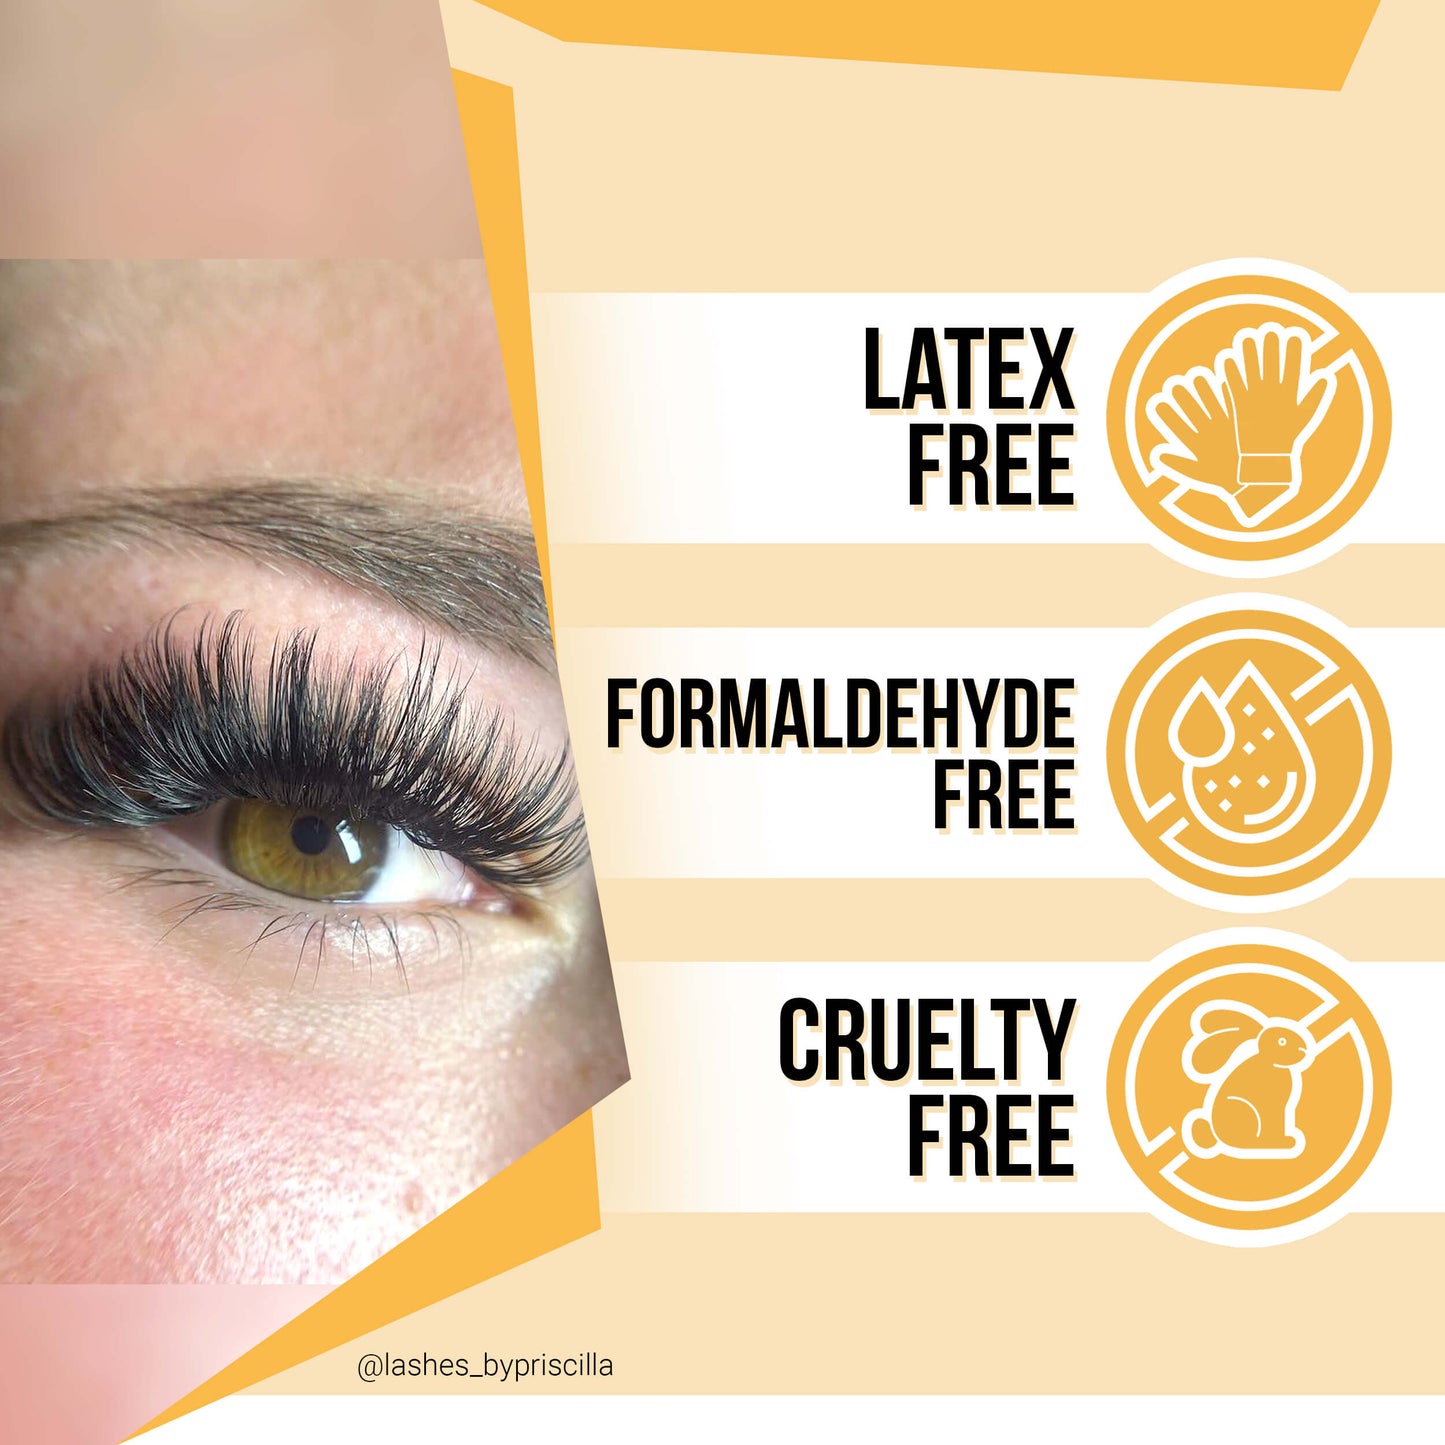 Procare Eyelash extension glue: Latex-free, formaldehyde-free, and cruelty-free formula for a safe and ethical application experience.